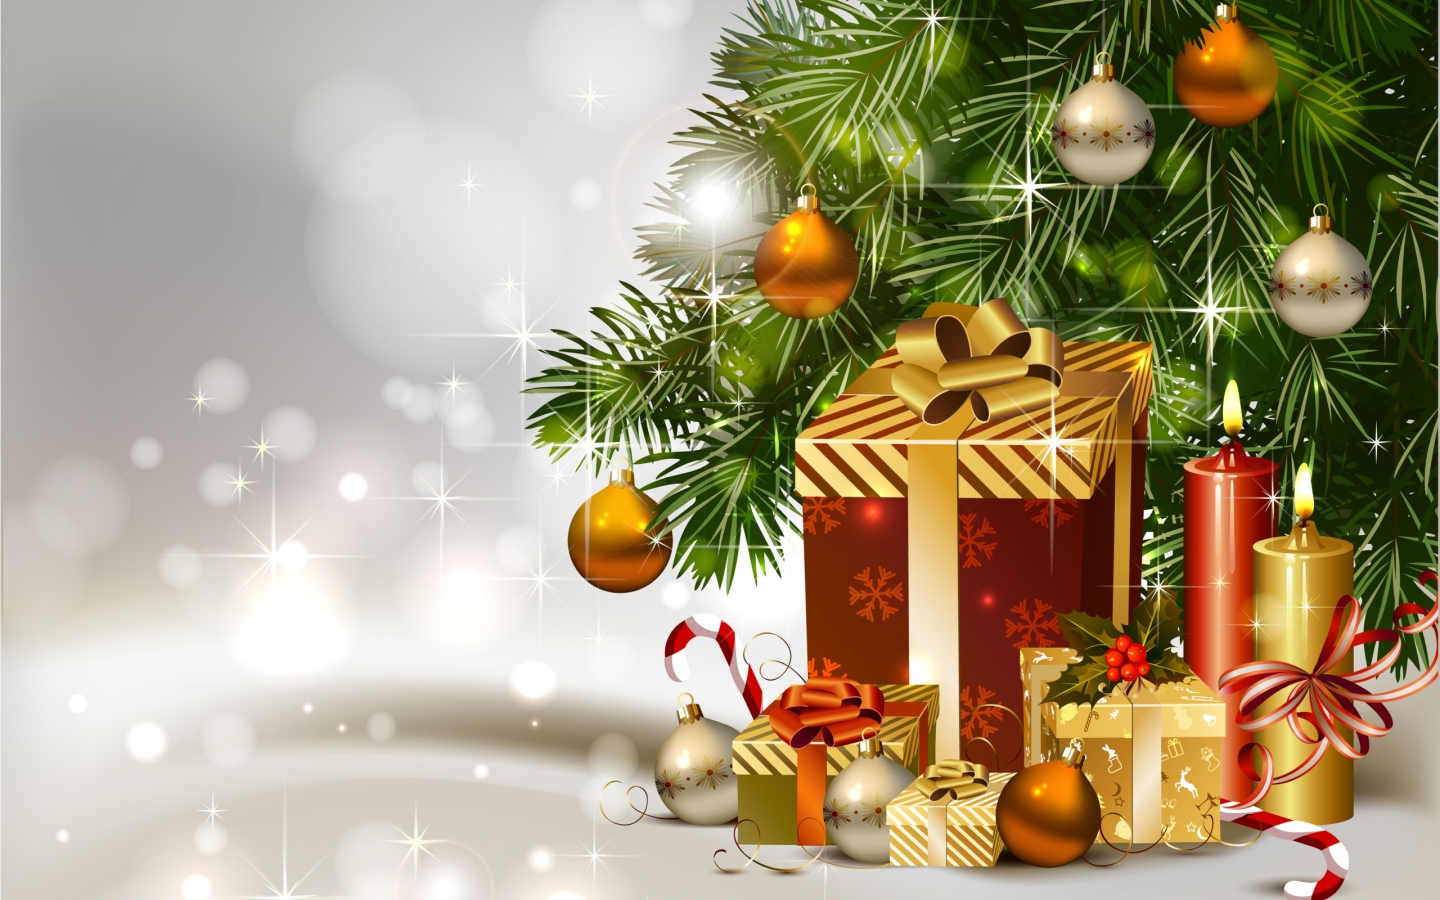 Gifts Under Christmas Tree for 1440 x 900 widescreen resolution